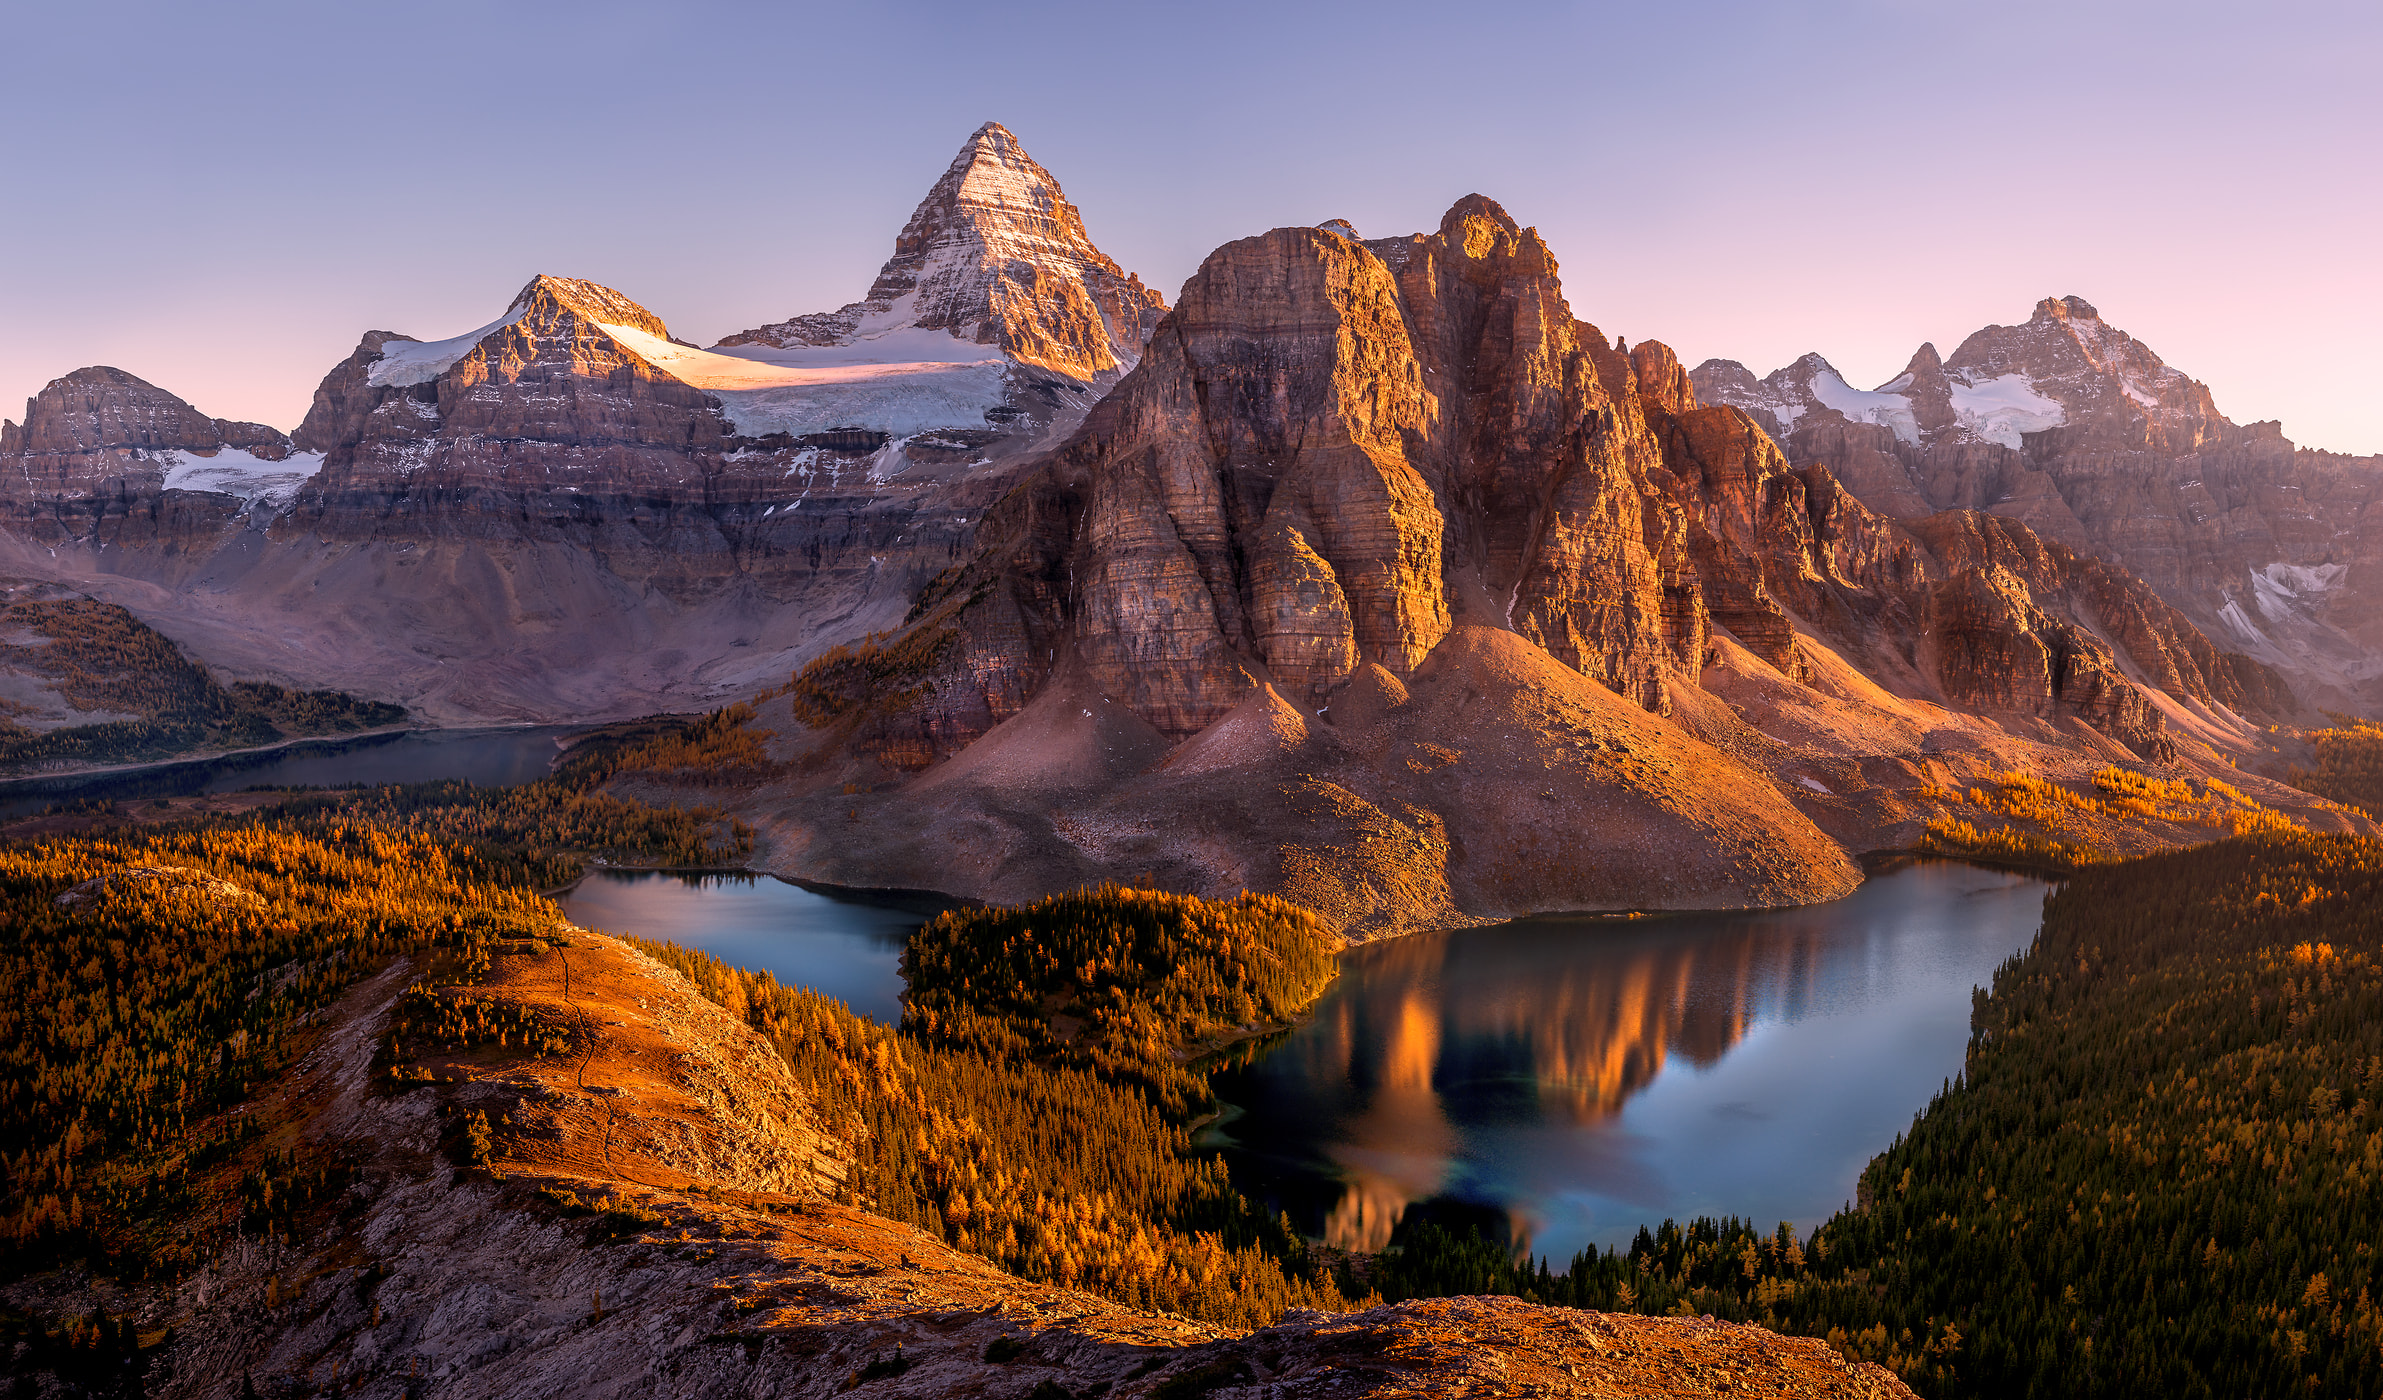 255 megapixels! A very high resolution, large-format VAST photo of Mt. Assiniboine and the Canadian Rockies in Autumn at sunset with lakes and trees; fine art mountain landscape photograph created by Tim Shields in Mt. Assiniboine Provincial Park, British Columbia, Canada.